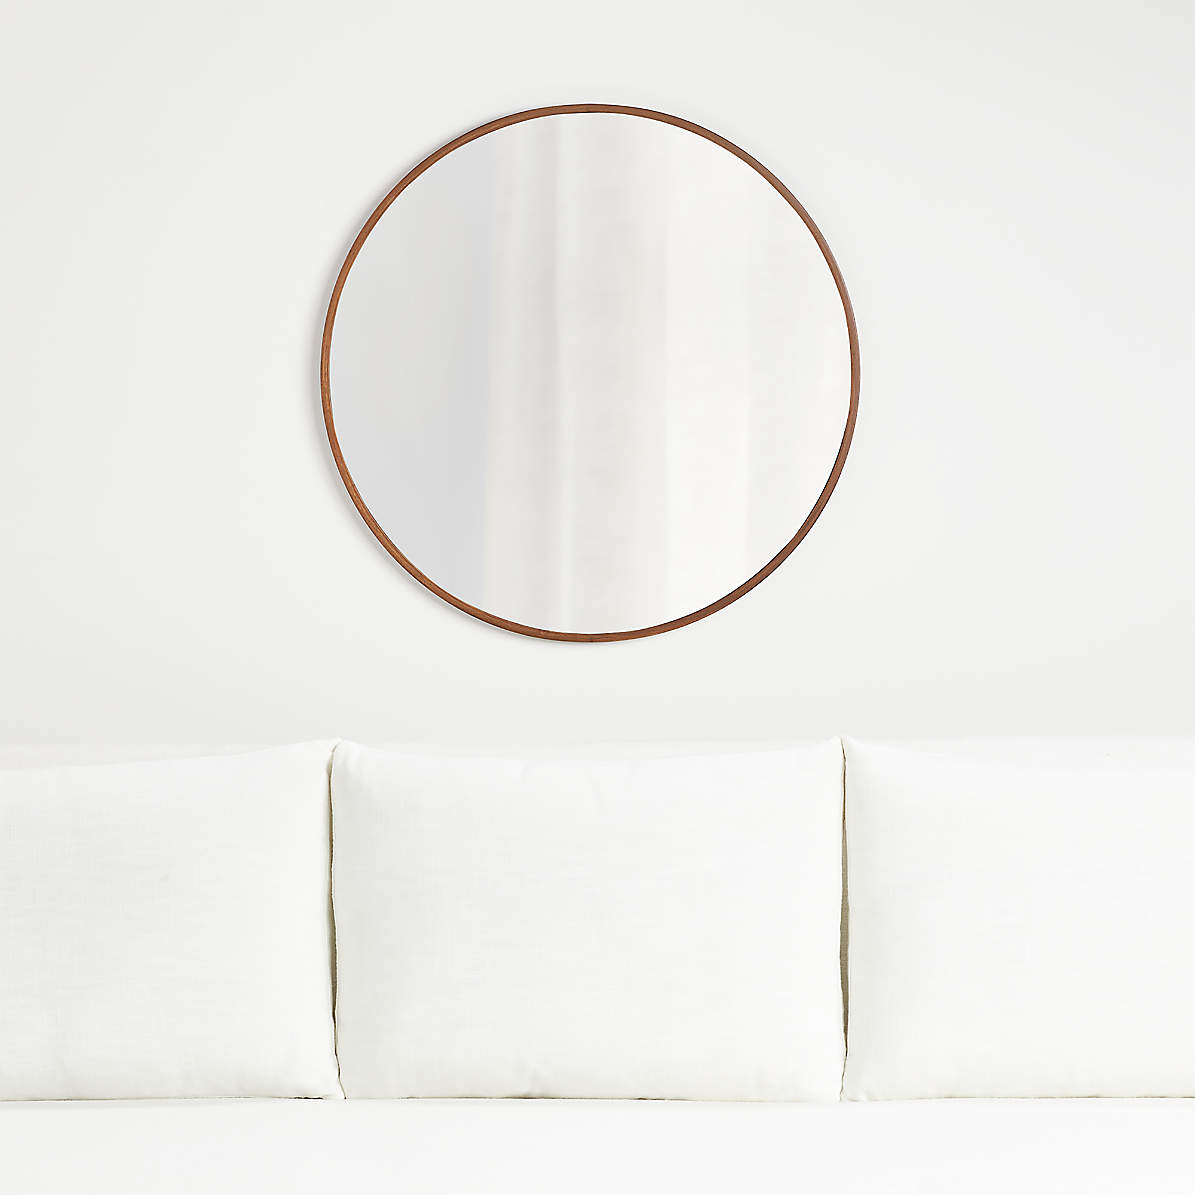 Engineered Wood Round Wall Mirror In Silver Colour